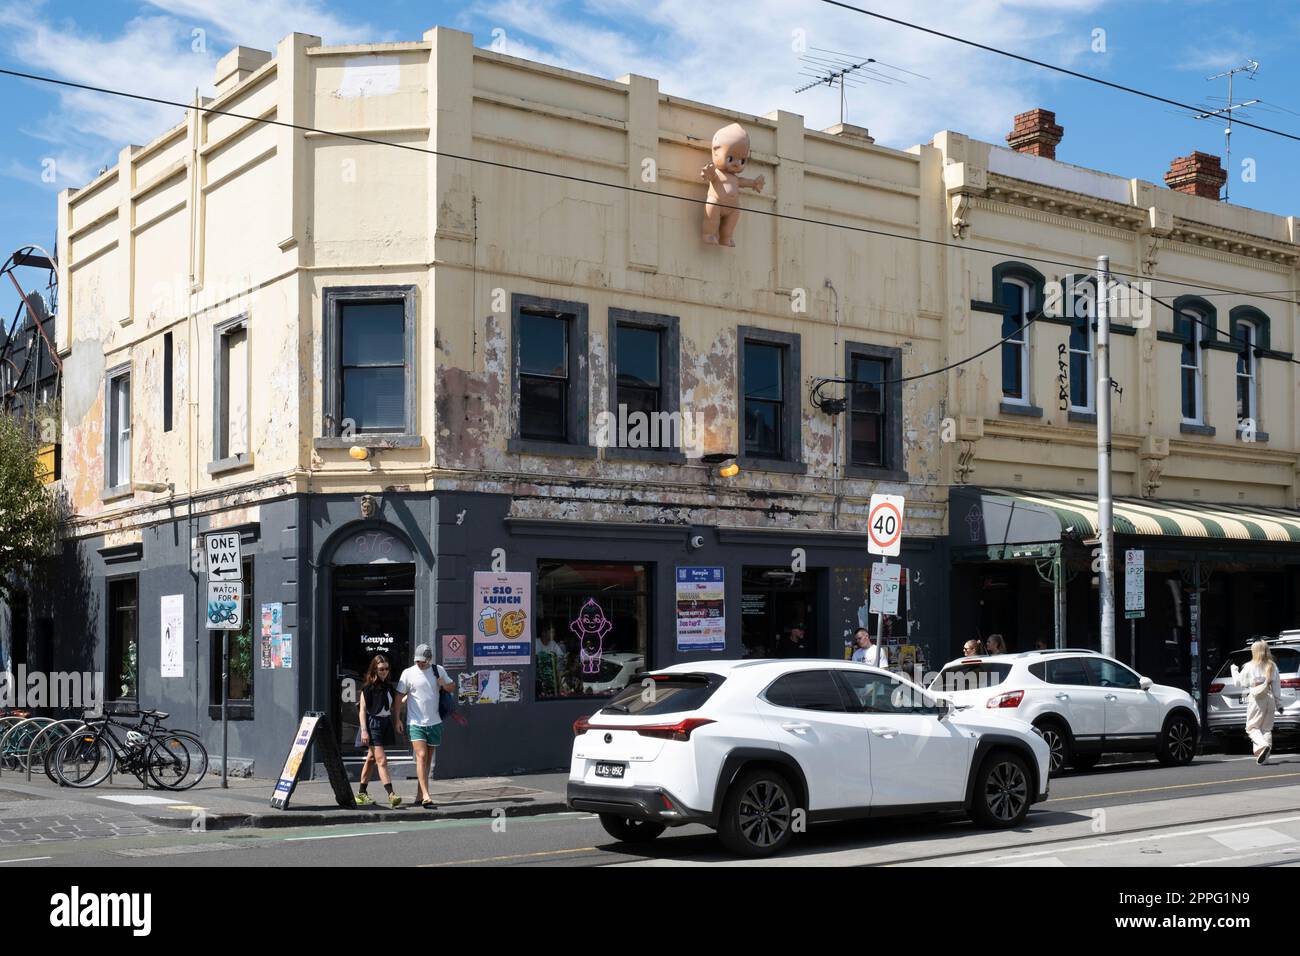 Brunswick street in Fitzroy in Melbourne, with the Kewpie restaurant and the giant Kewpie doll on the building's exterior Stock Photo